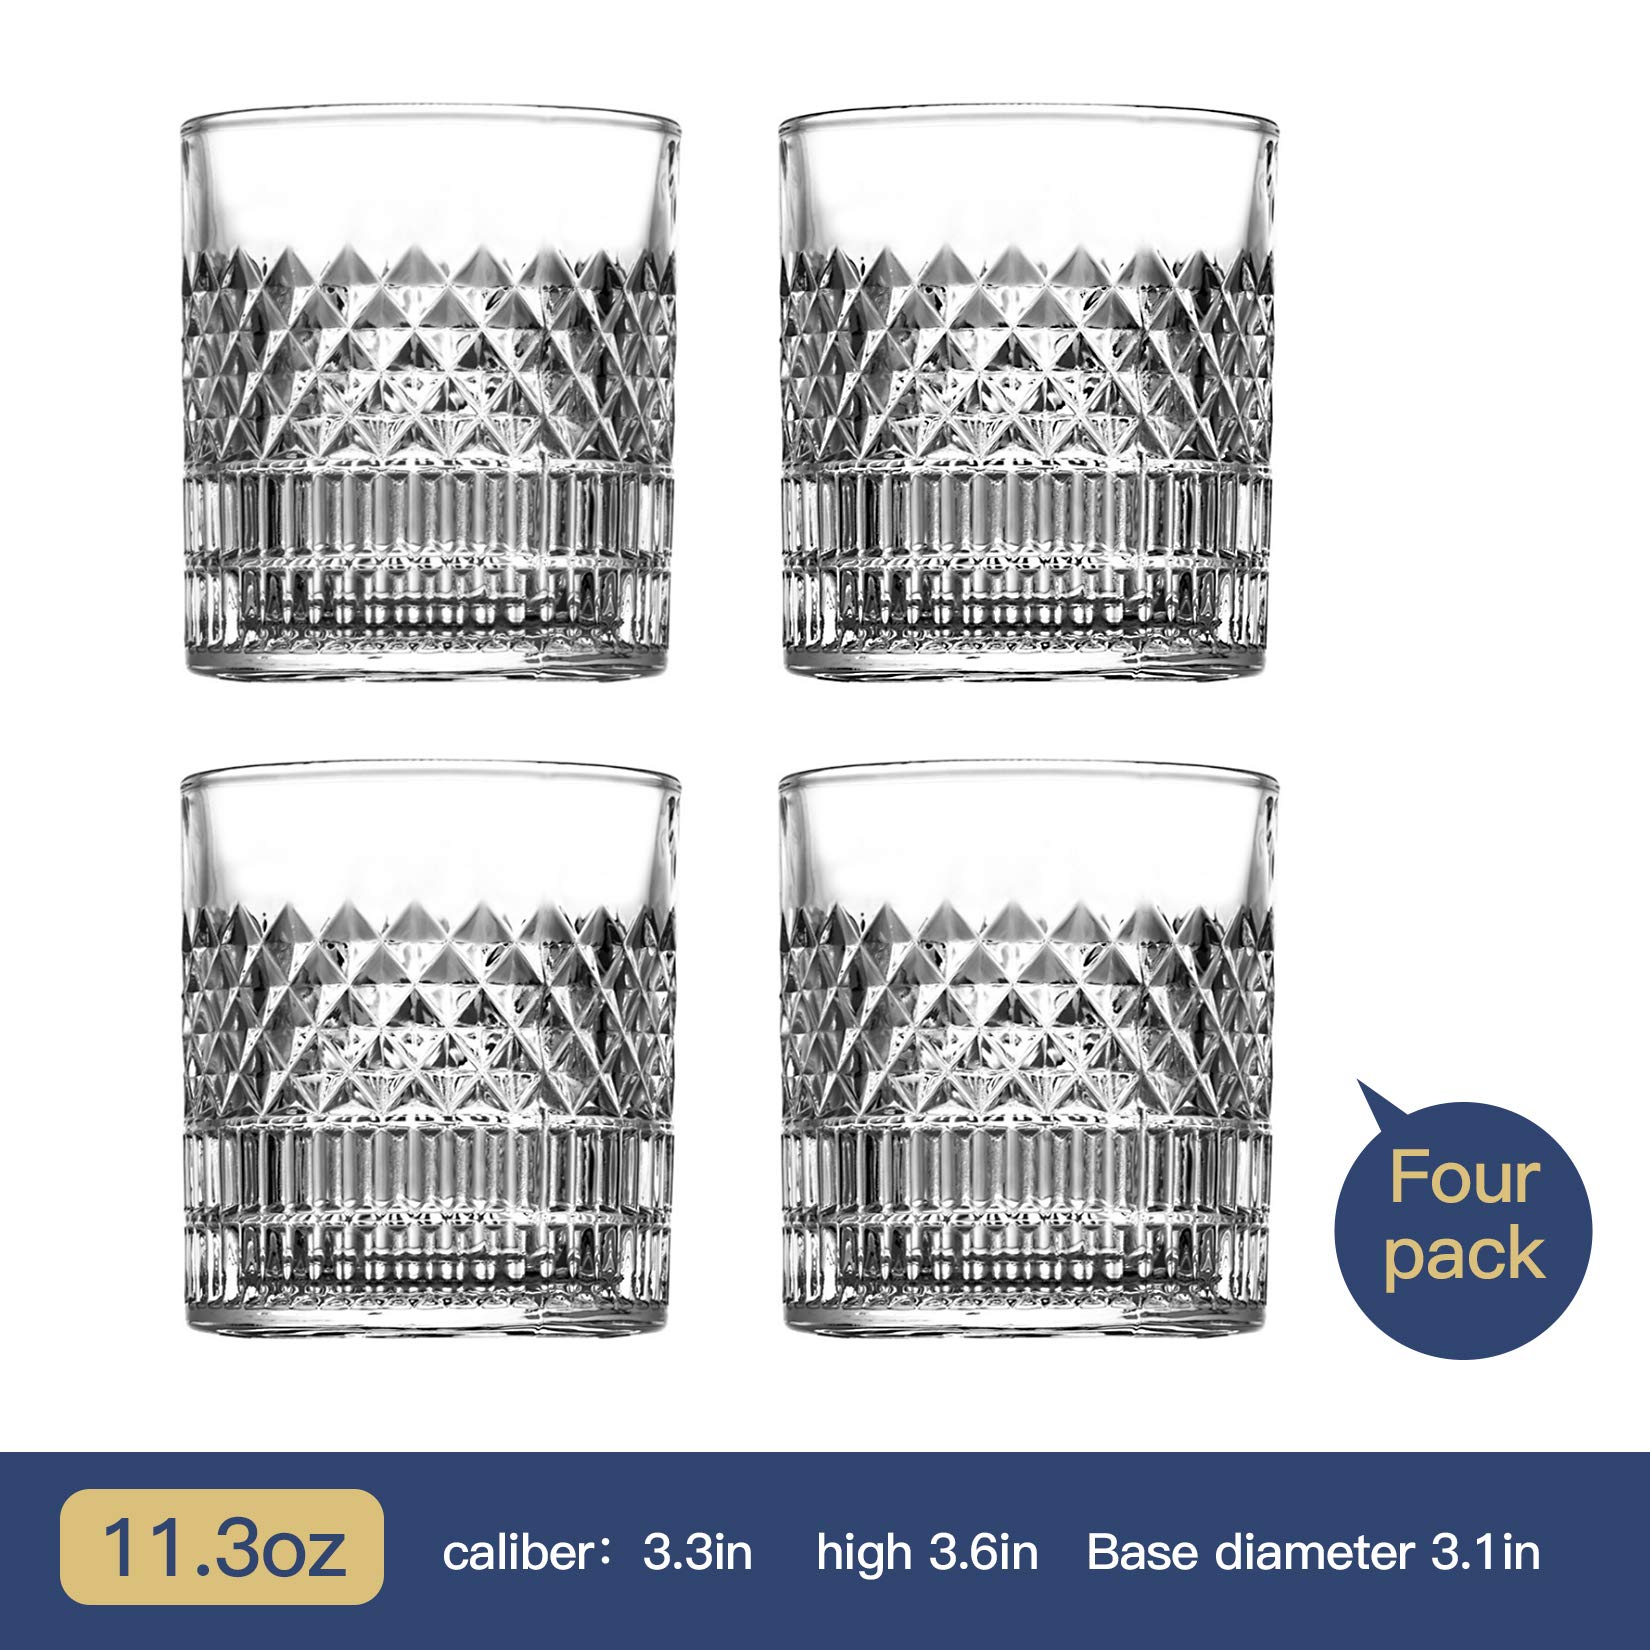 MSAAEX Whiskey Glasses Old Fashioned Whiskey Glass Barware for Scotch, Bourbon, Liquor and Cocktail Drinking for Men and Women - Set of 4